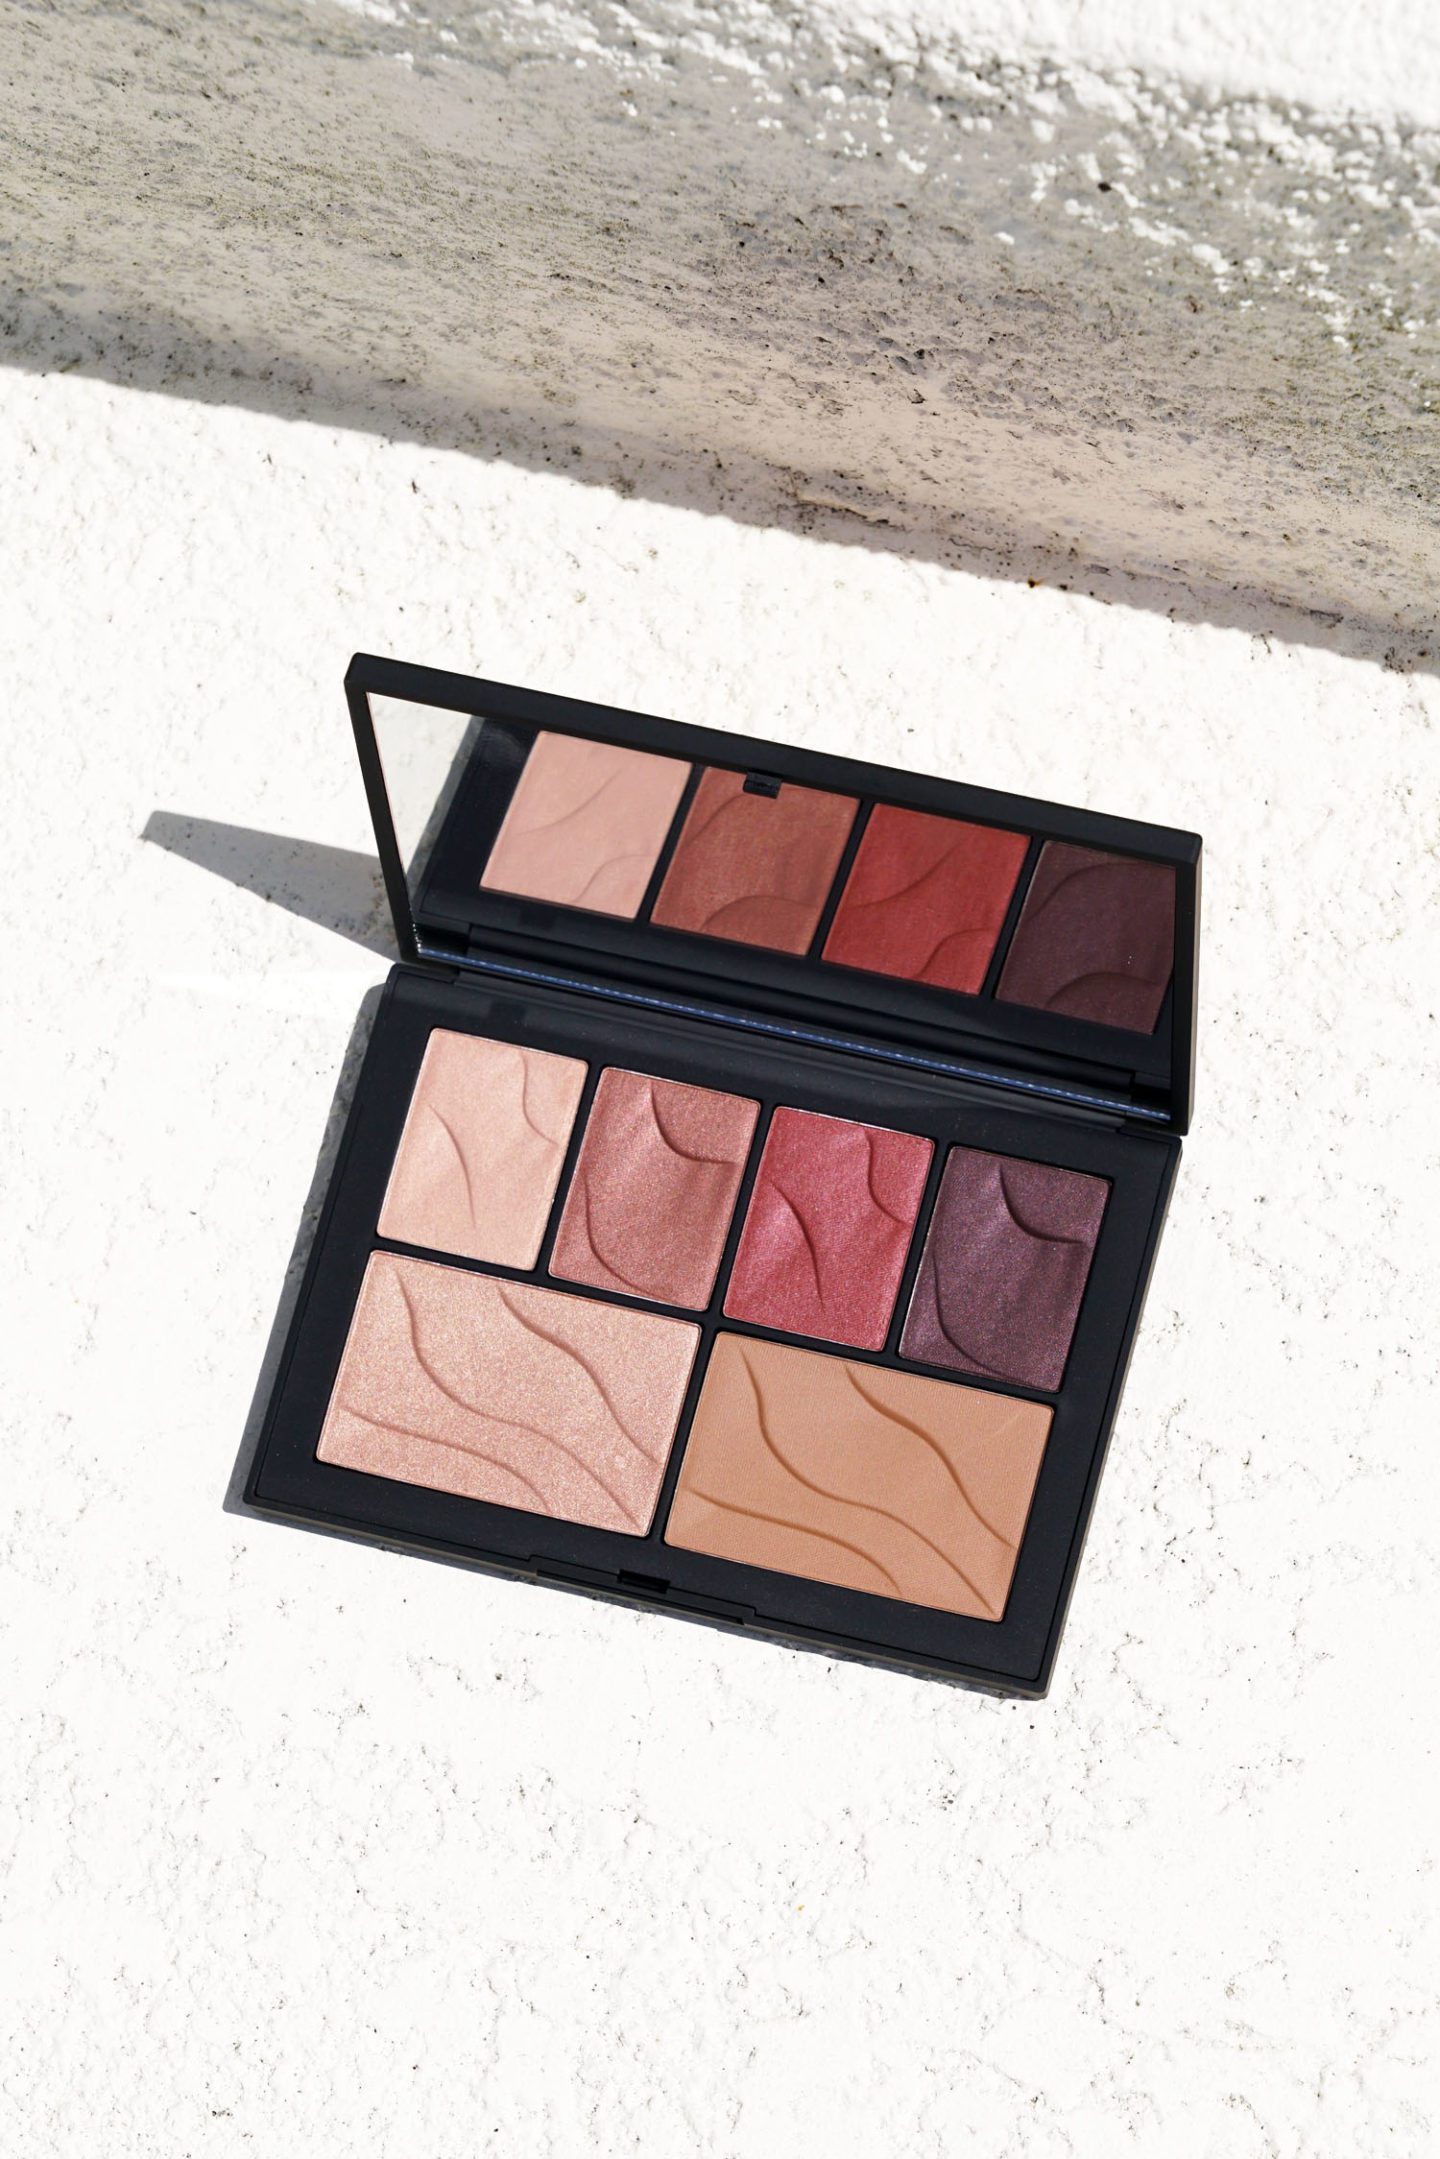 NARS Summer Hot Nights Face Palette review